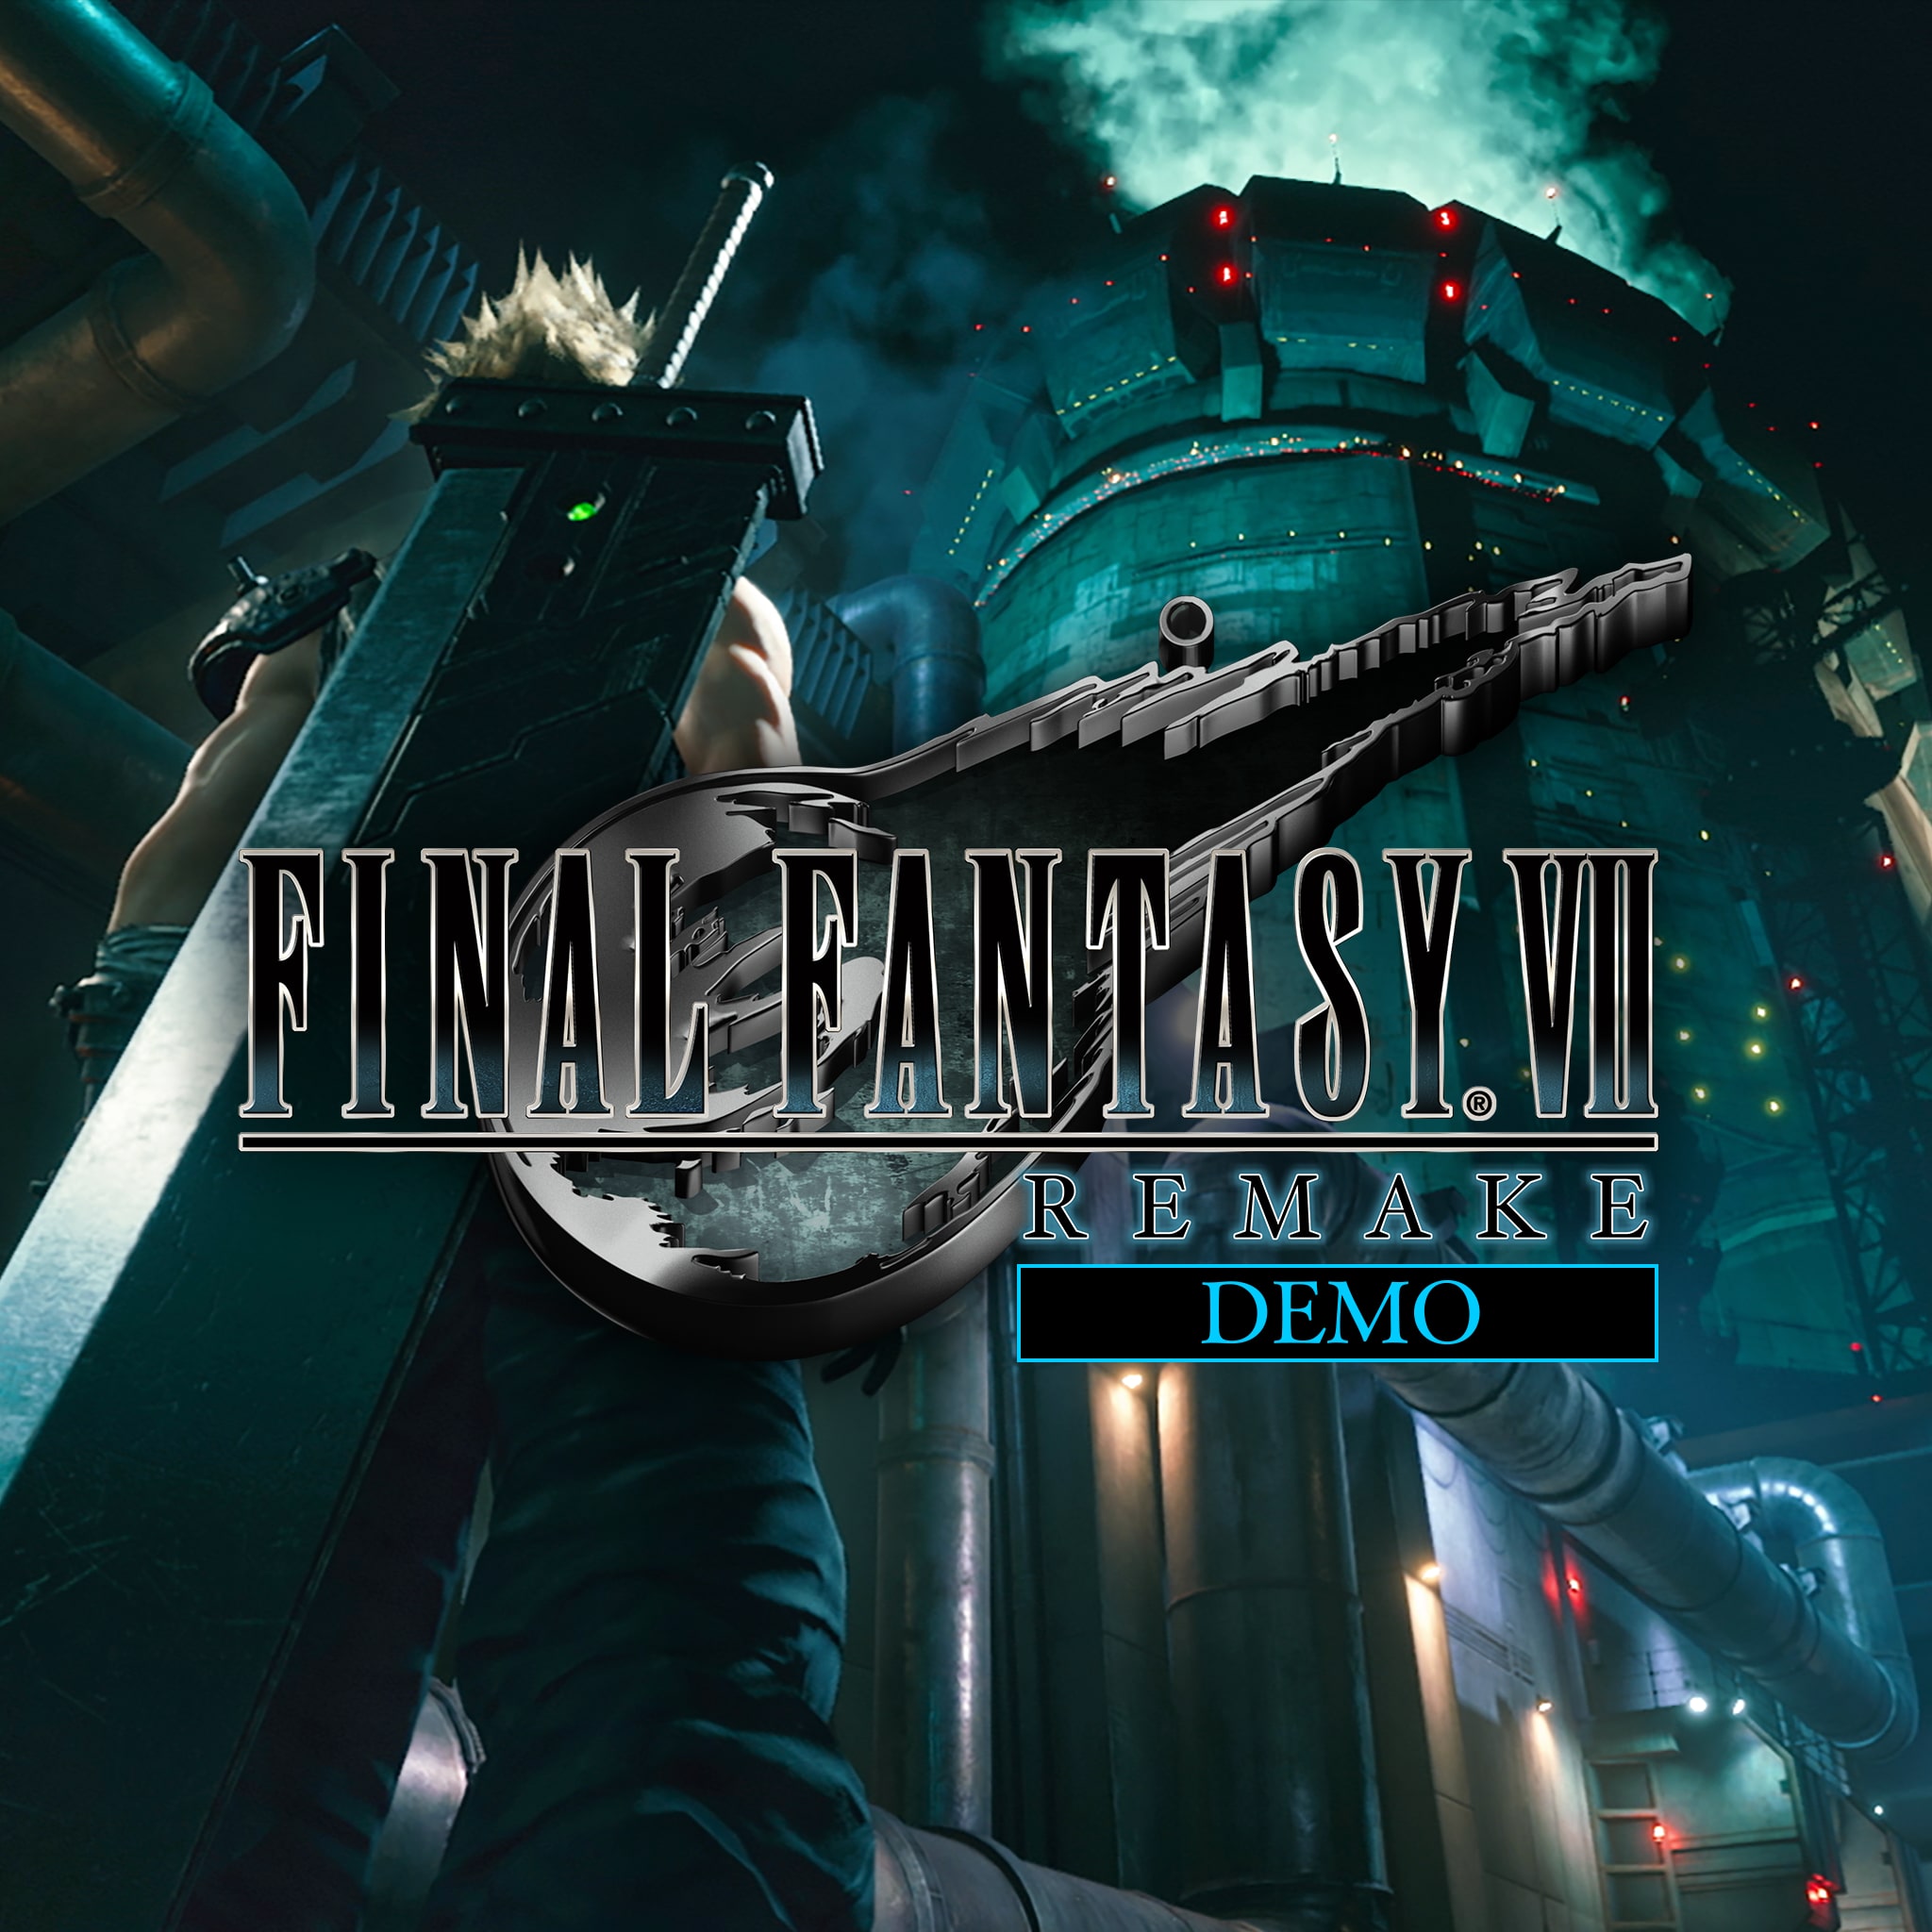 Games The Shop - Final Fantasy 7 Remake Deluxe Edition is